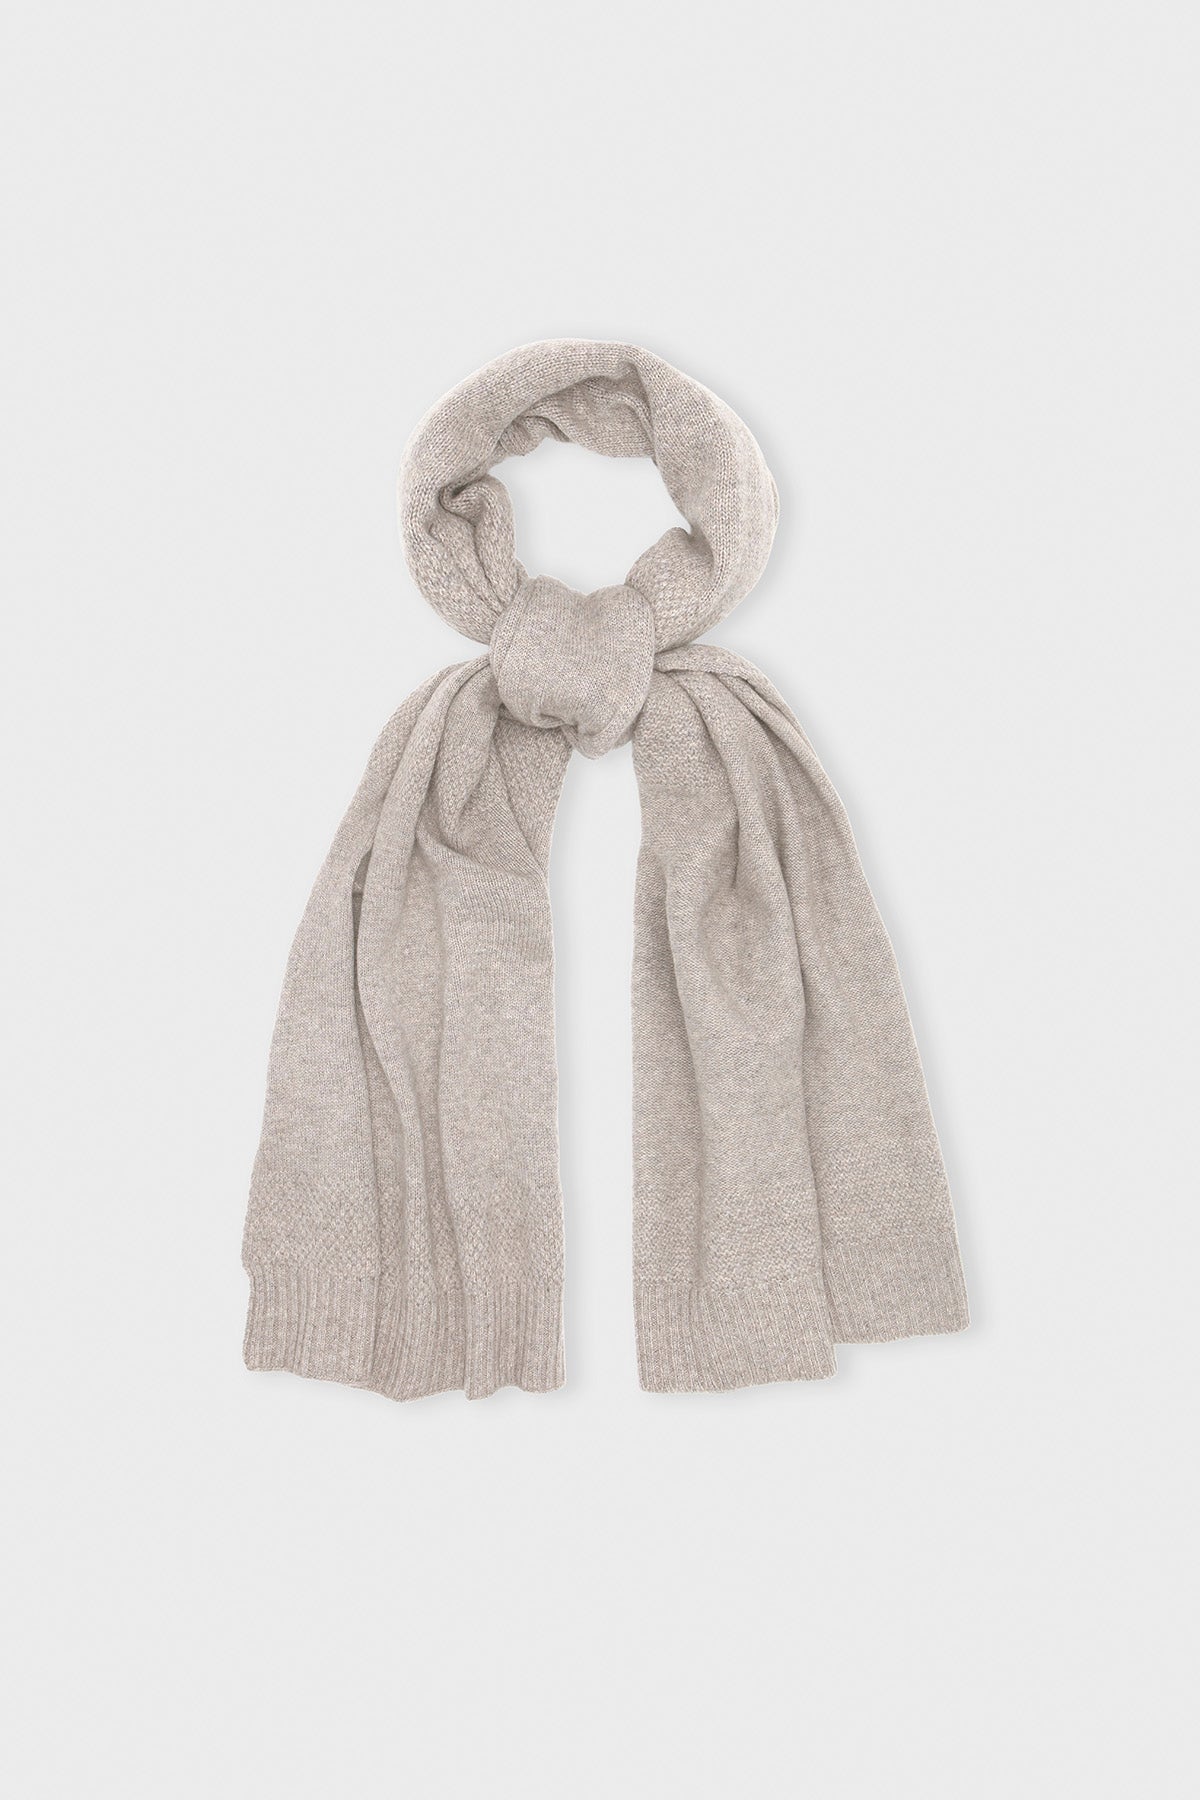 CARE BY ME 100% Cashmere Womens Mea Scarf